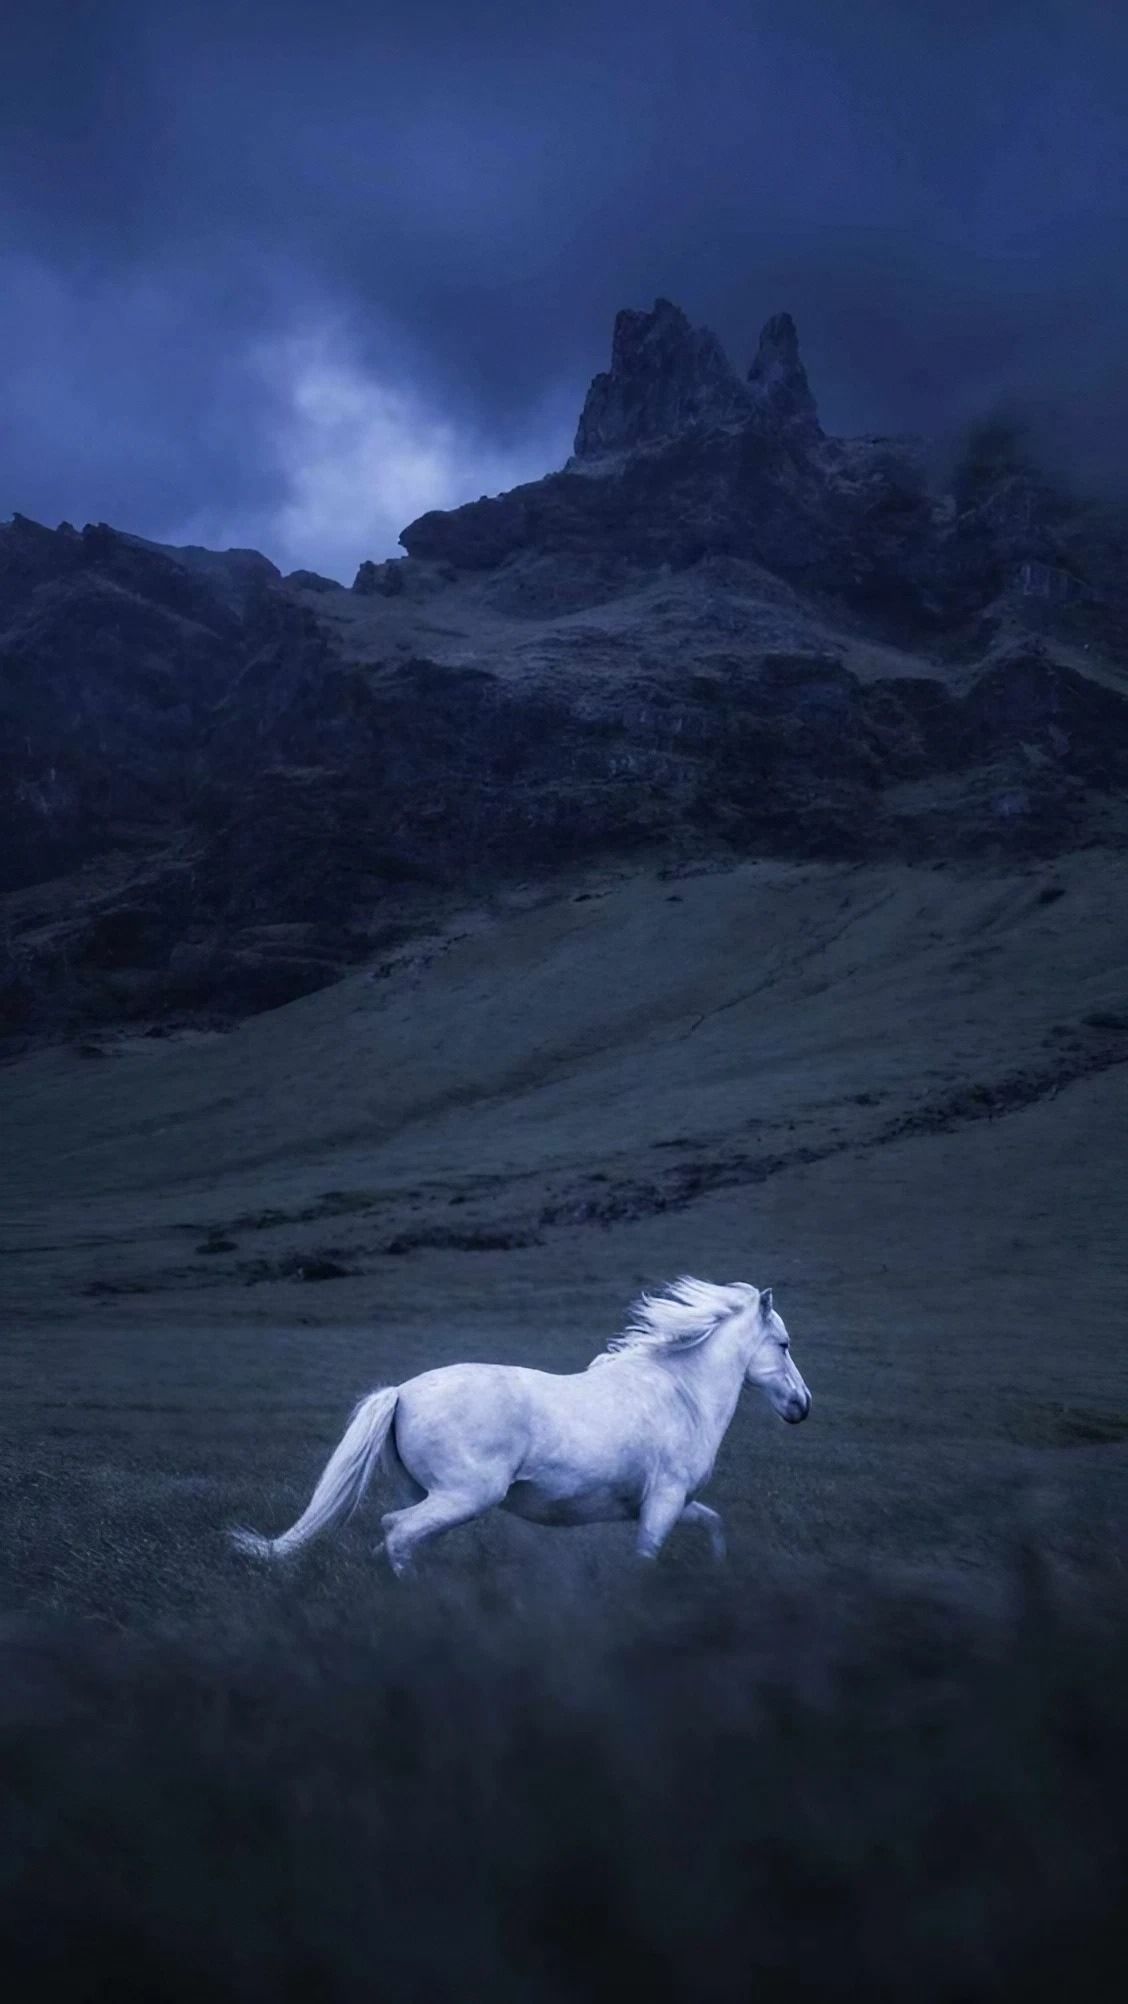 A white horse running in a field with a mountain in the background - Horse